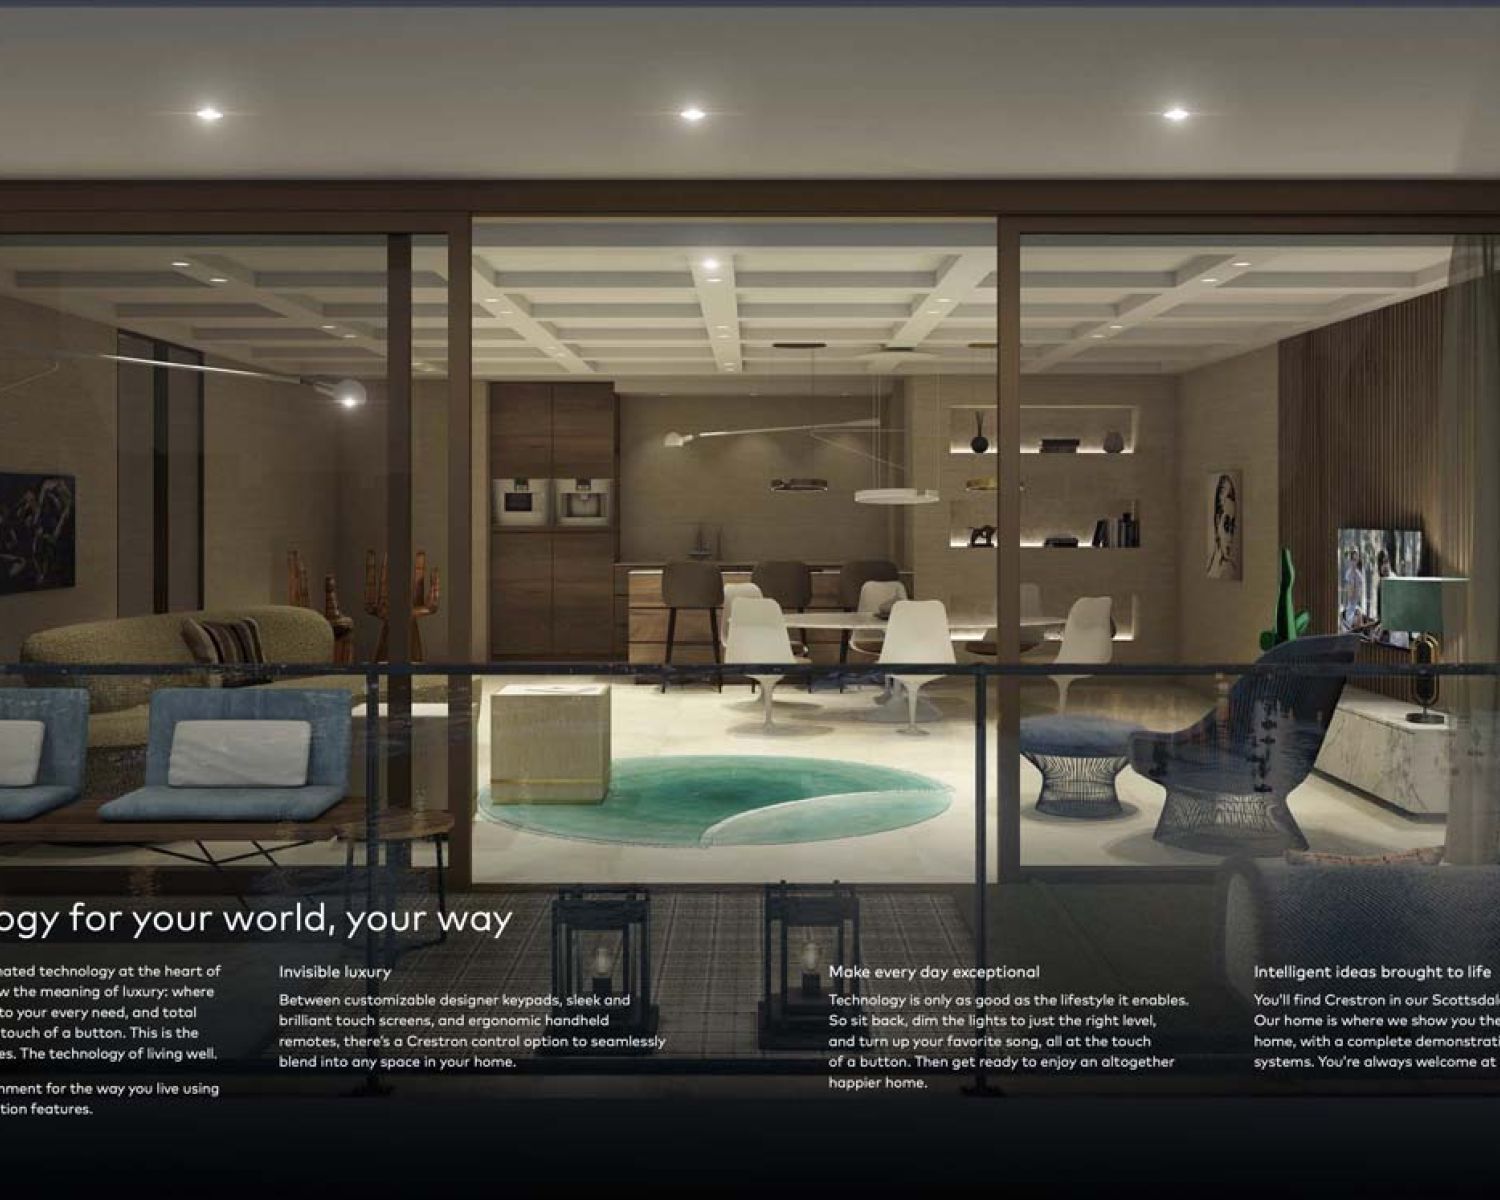 Crestron information on image of luxury living room